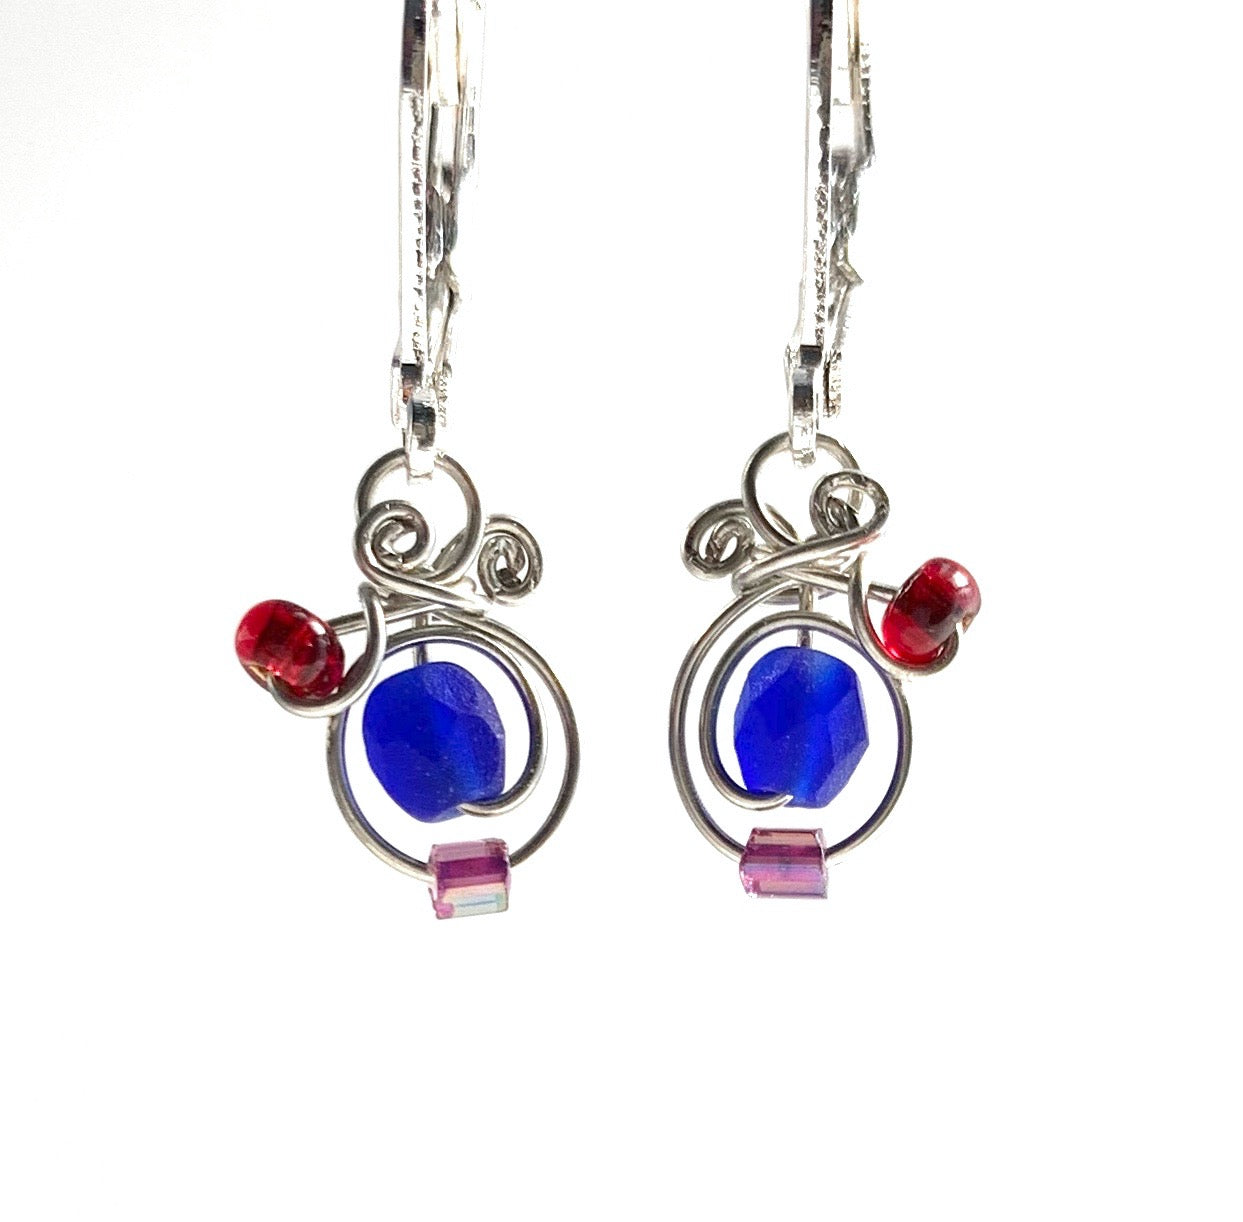 Silver coated copper wire with irridescent royal glass beads with red and purple glass accents. They have leverback hooks and hang a hair past a 1cm long.